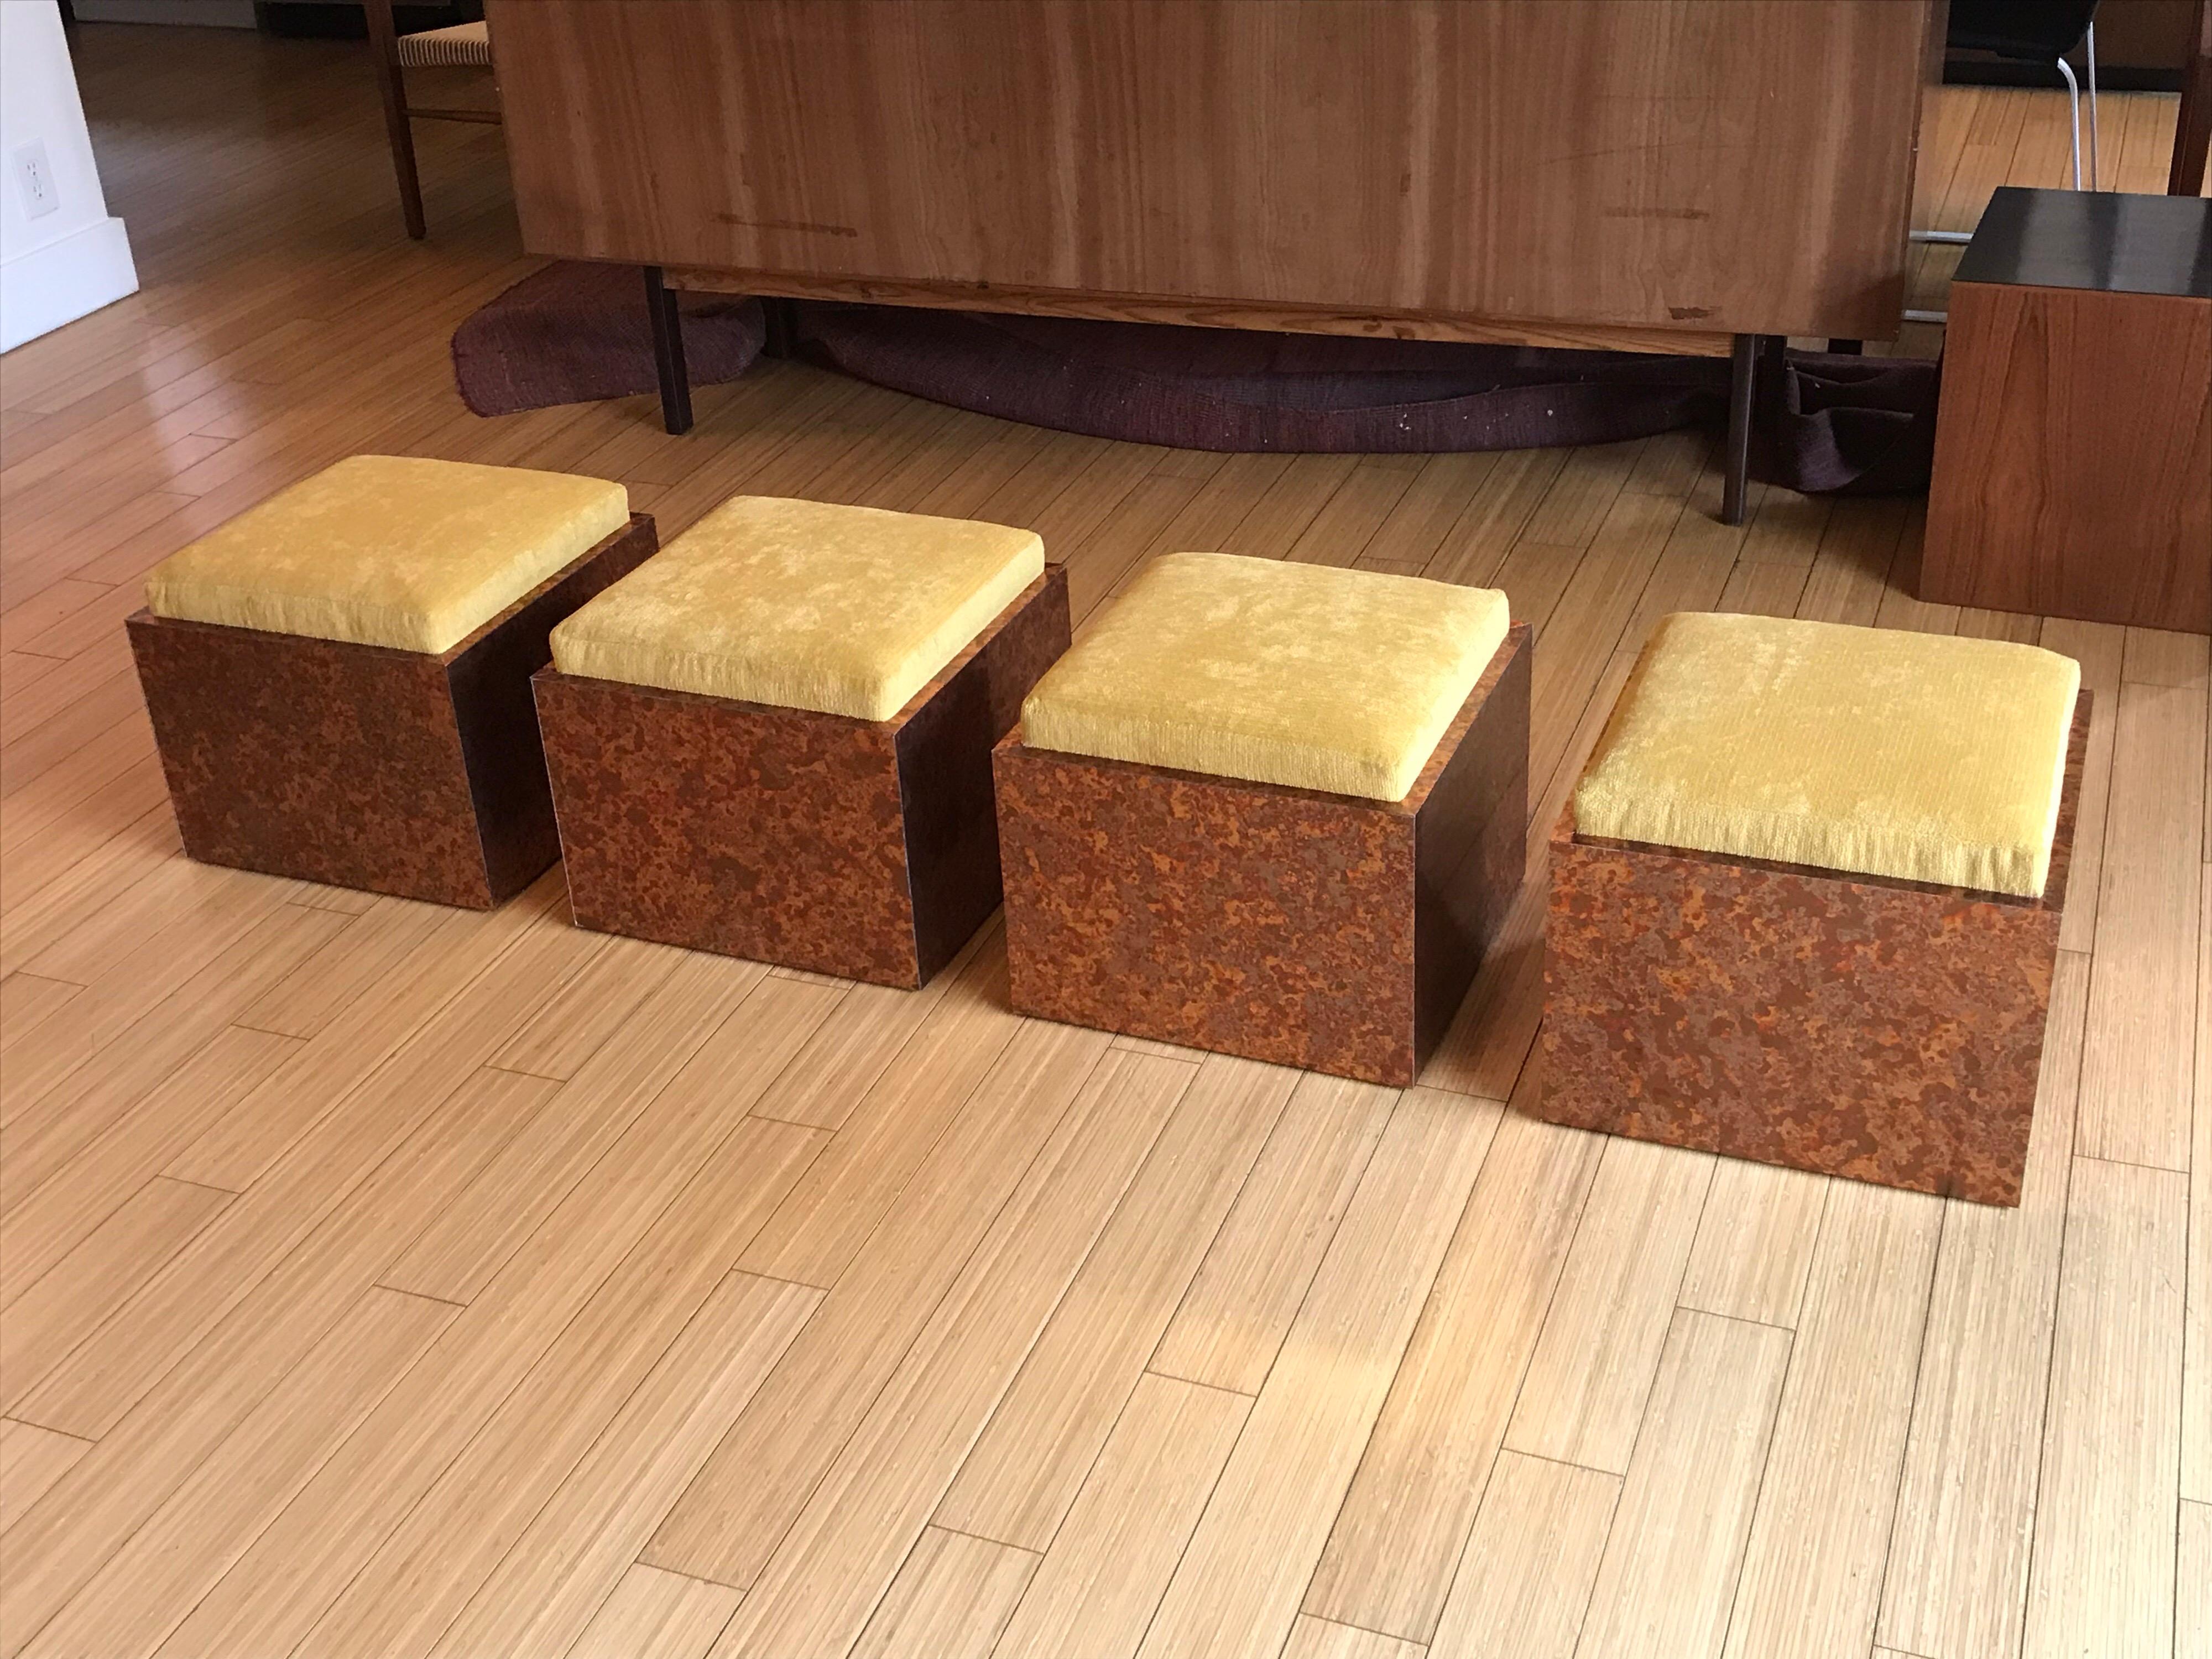 Ultra modern designs.
Simple and timeless form.
Plywood with mottled hue steel veneer with marigold upholstery.
Great for any occasion, living room, bedroom or gallery et cetra